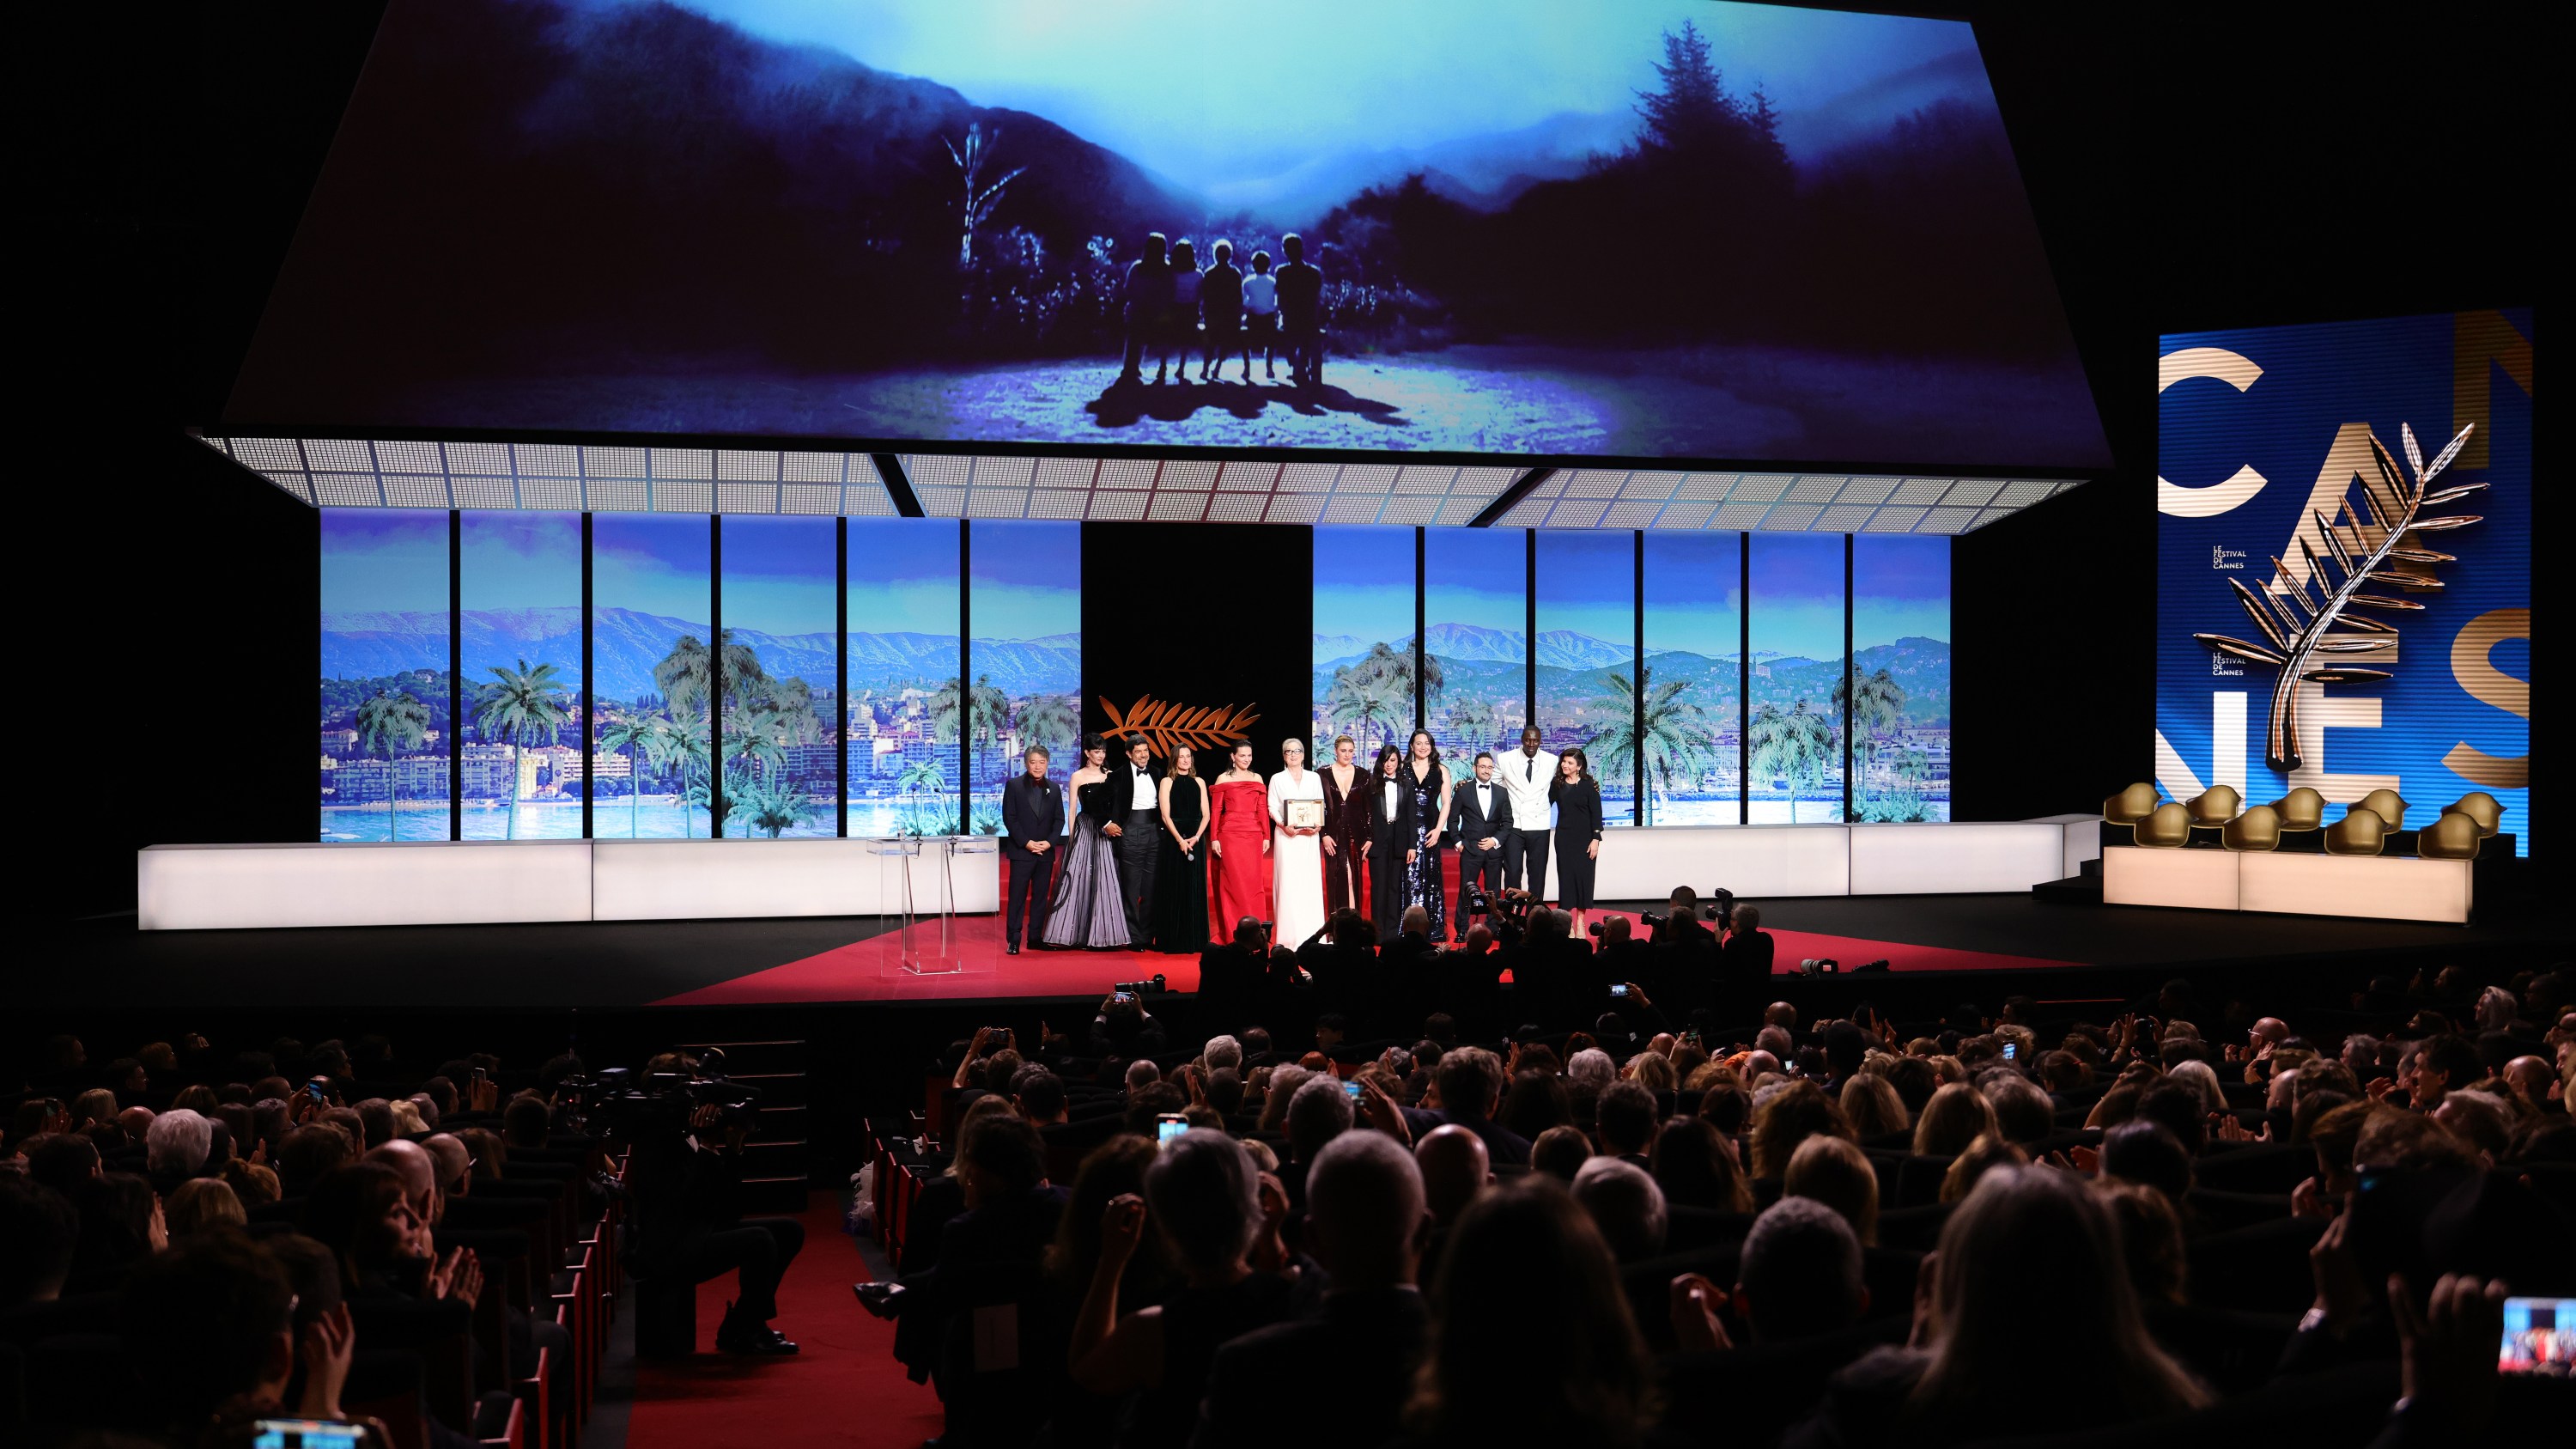 CANNES, FRANCE - MAY 14: (L-R) Jury member Hirokazu Kore-eda, jury member Eva Green, jury member Pierfrancesco Favino, Mistress of ceremonies Camille Cottin, Juliette Binoche, Meryl Streep with the Honorary Palme D’Or Award, President of the Jury Greta Gerwig, jury members Nadine Labaki, Lily Gladstone, Juan Antonio Bayona, Omar Sy and Ebru Ceylan pose on stage during the opening ceremony at the 77th annual Cannes Film Festival at Palais des Festivals on May 14, 2024 in Cannes, France. (Photo by Andreas Rentz/Getty Images)